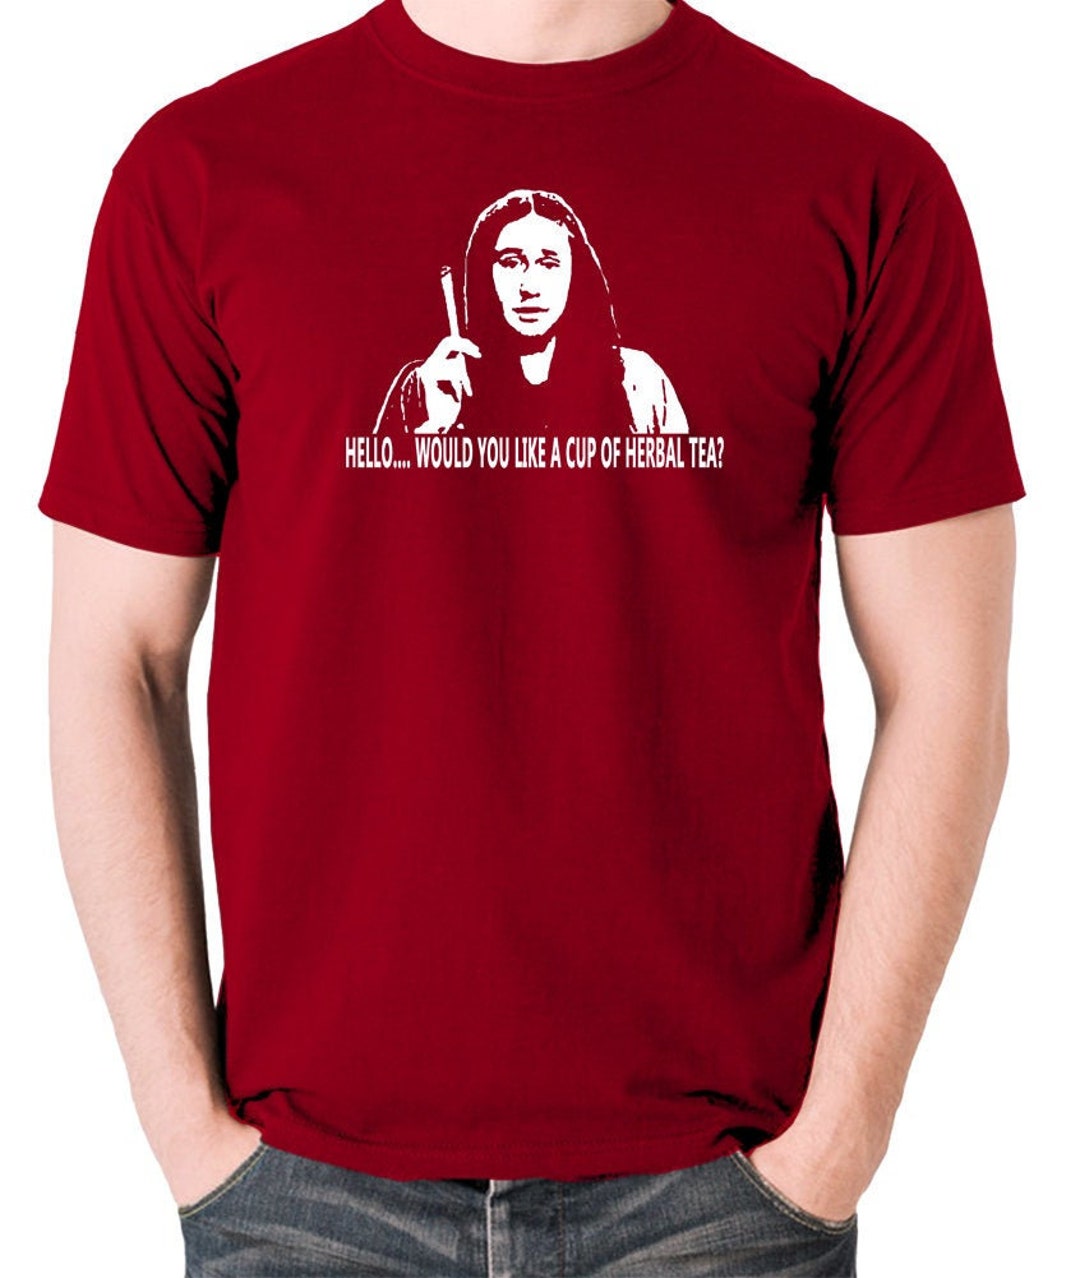 Traditional indian-They will not be oppressed tee' Men's T-Shirt